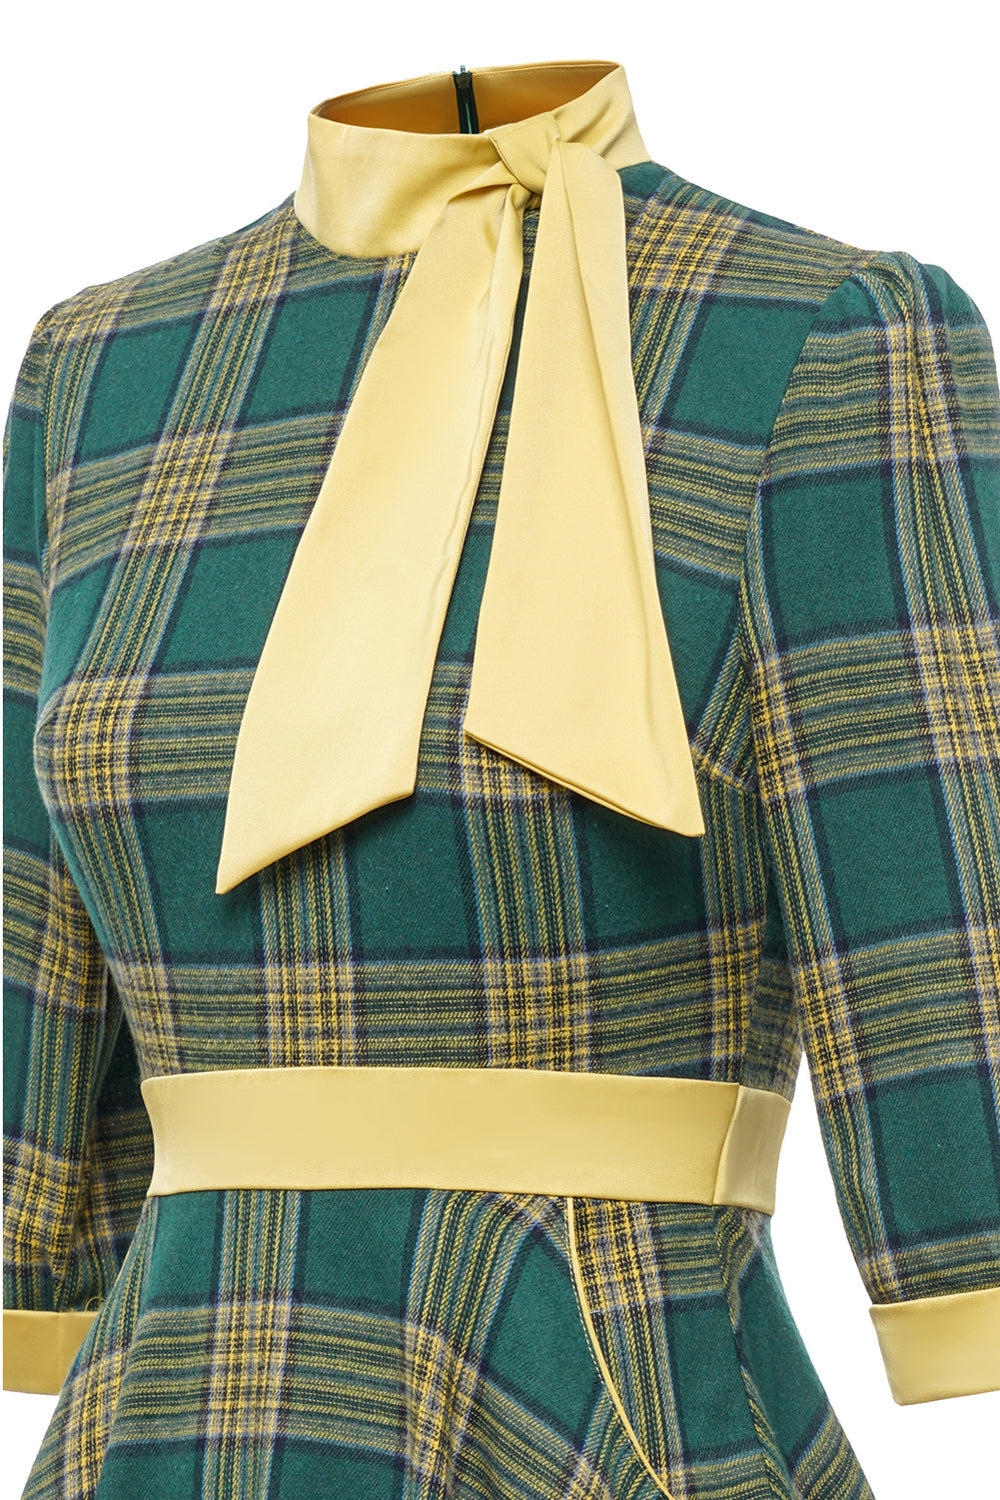 Green High Neck Long Sleeves A-Line Plaid Dress with Bow